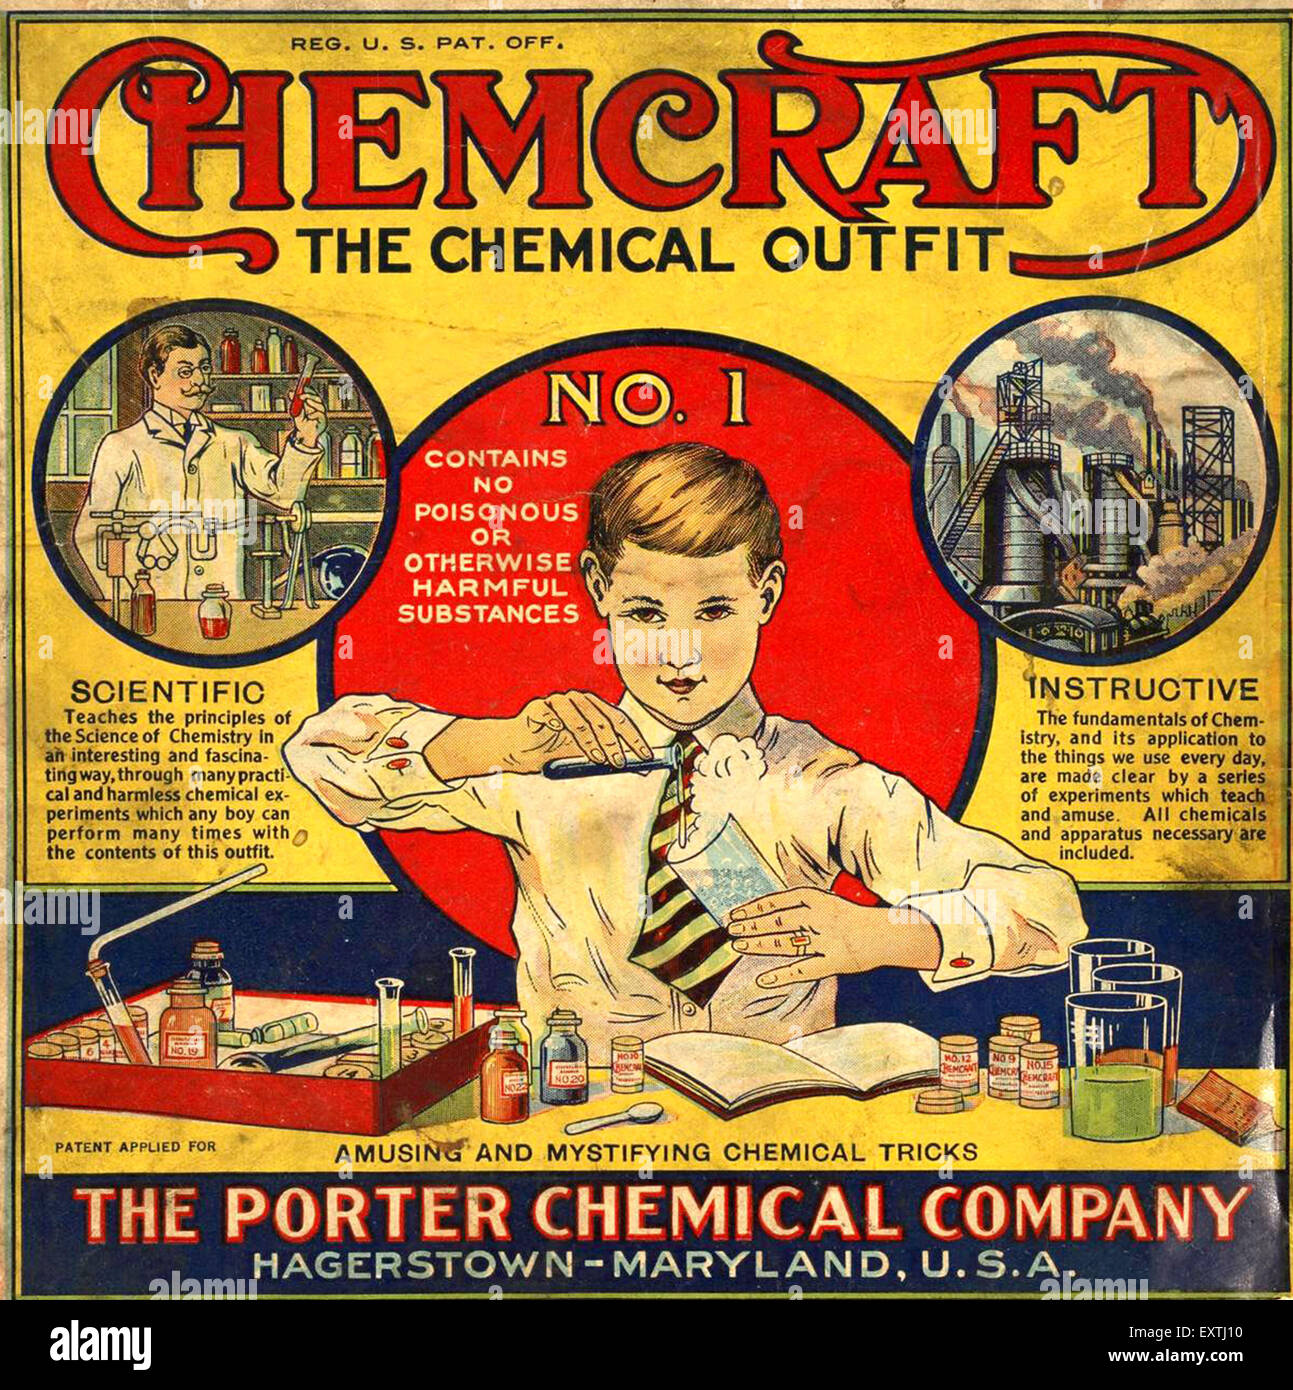 Pat reg. The Chemistry Set (the Ultimate Compilation of Slammin' big Beats). Old Science. Metal Printed Adverts from 1920s. Magazines about Scientific Experiments to read.